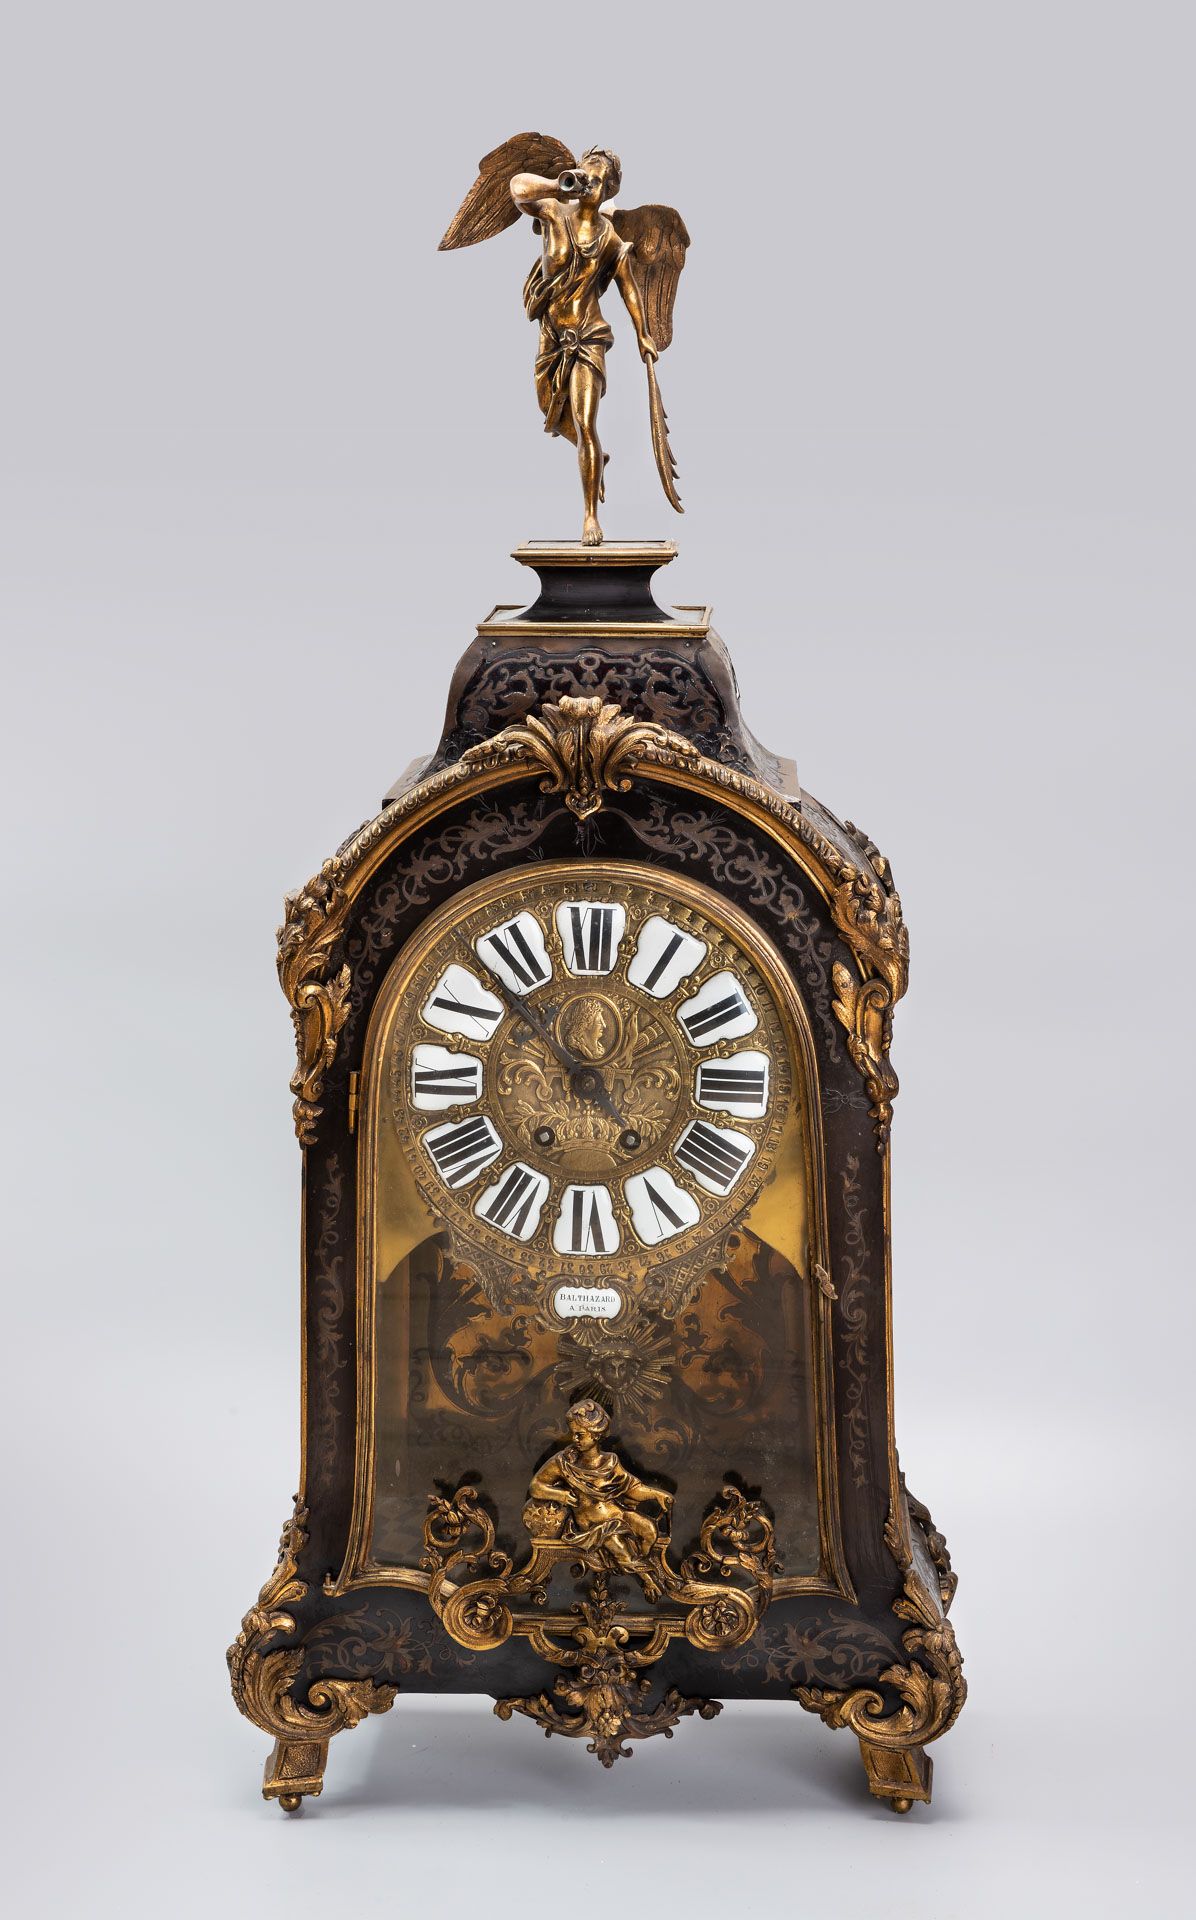 A Fine Boulle Clock by Charles Baltazar, France, Mid-Late 18th Century - Image 2 of 5